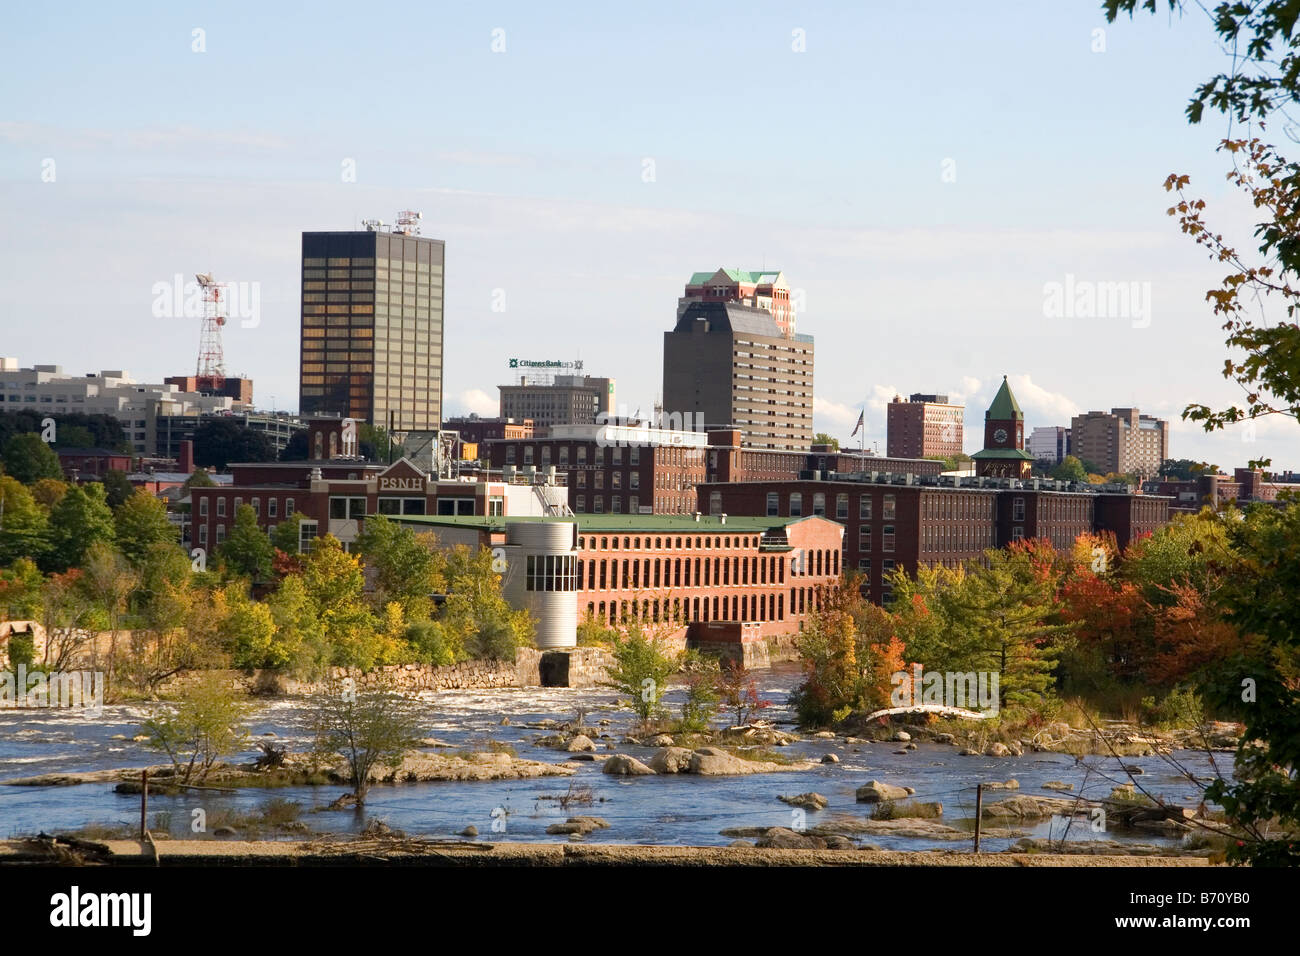 The Merrimack River and mill district at Manchester New Hampshire USA Stock Photo